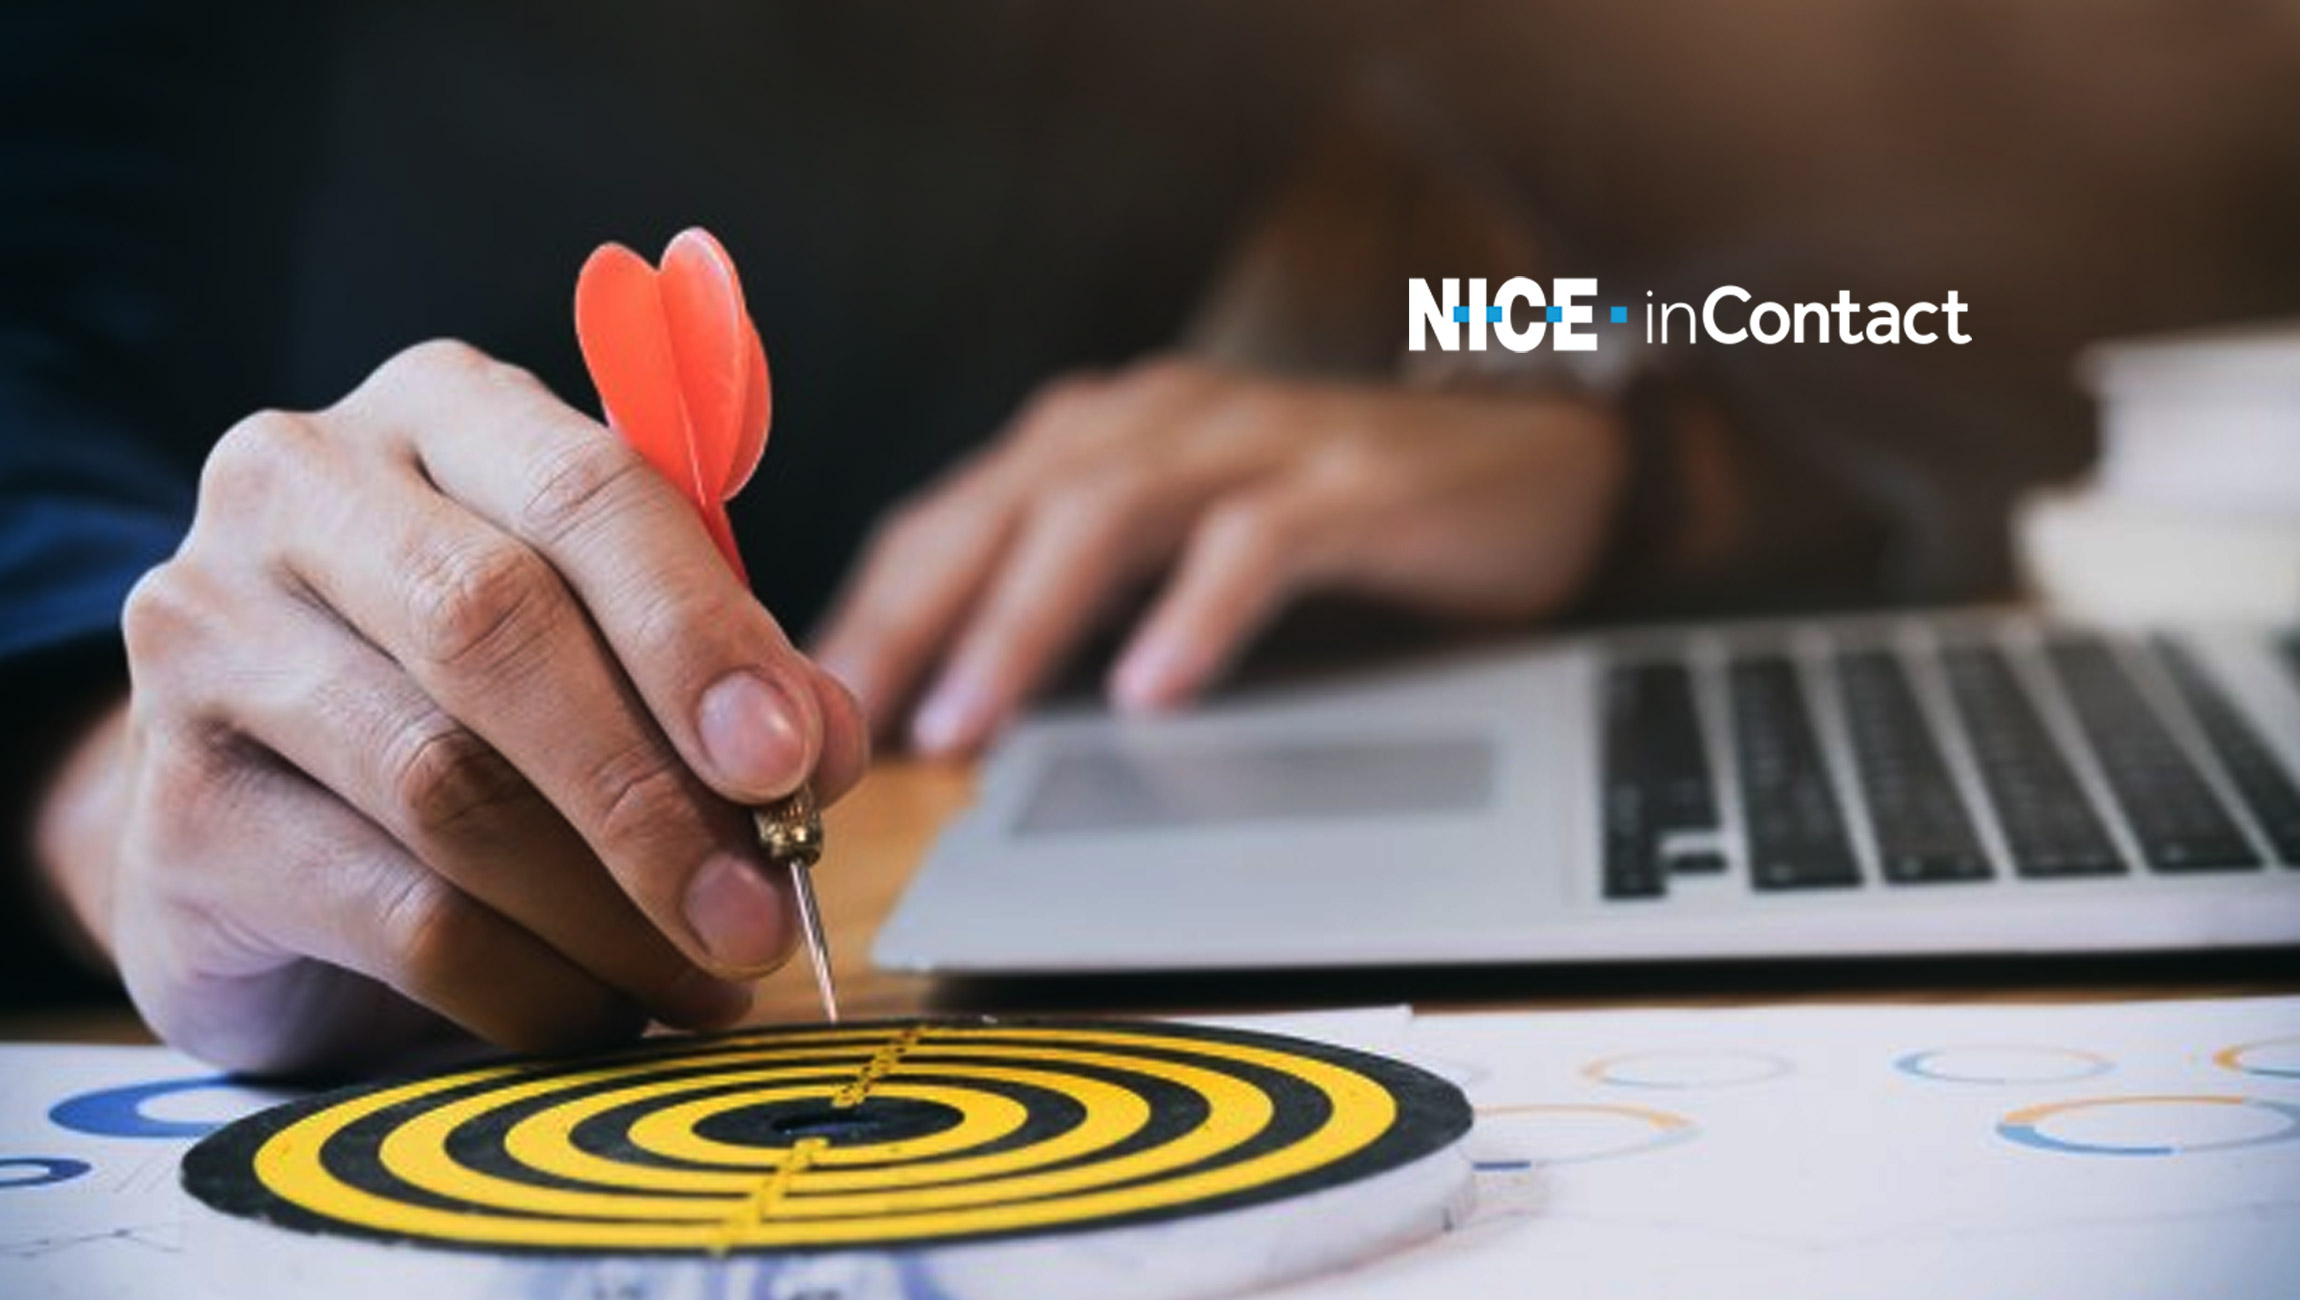 NICE inContact Achieves Highest and Furthest Overall Position for Ability